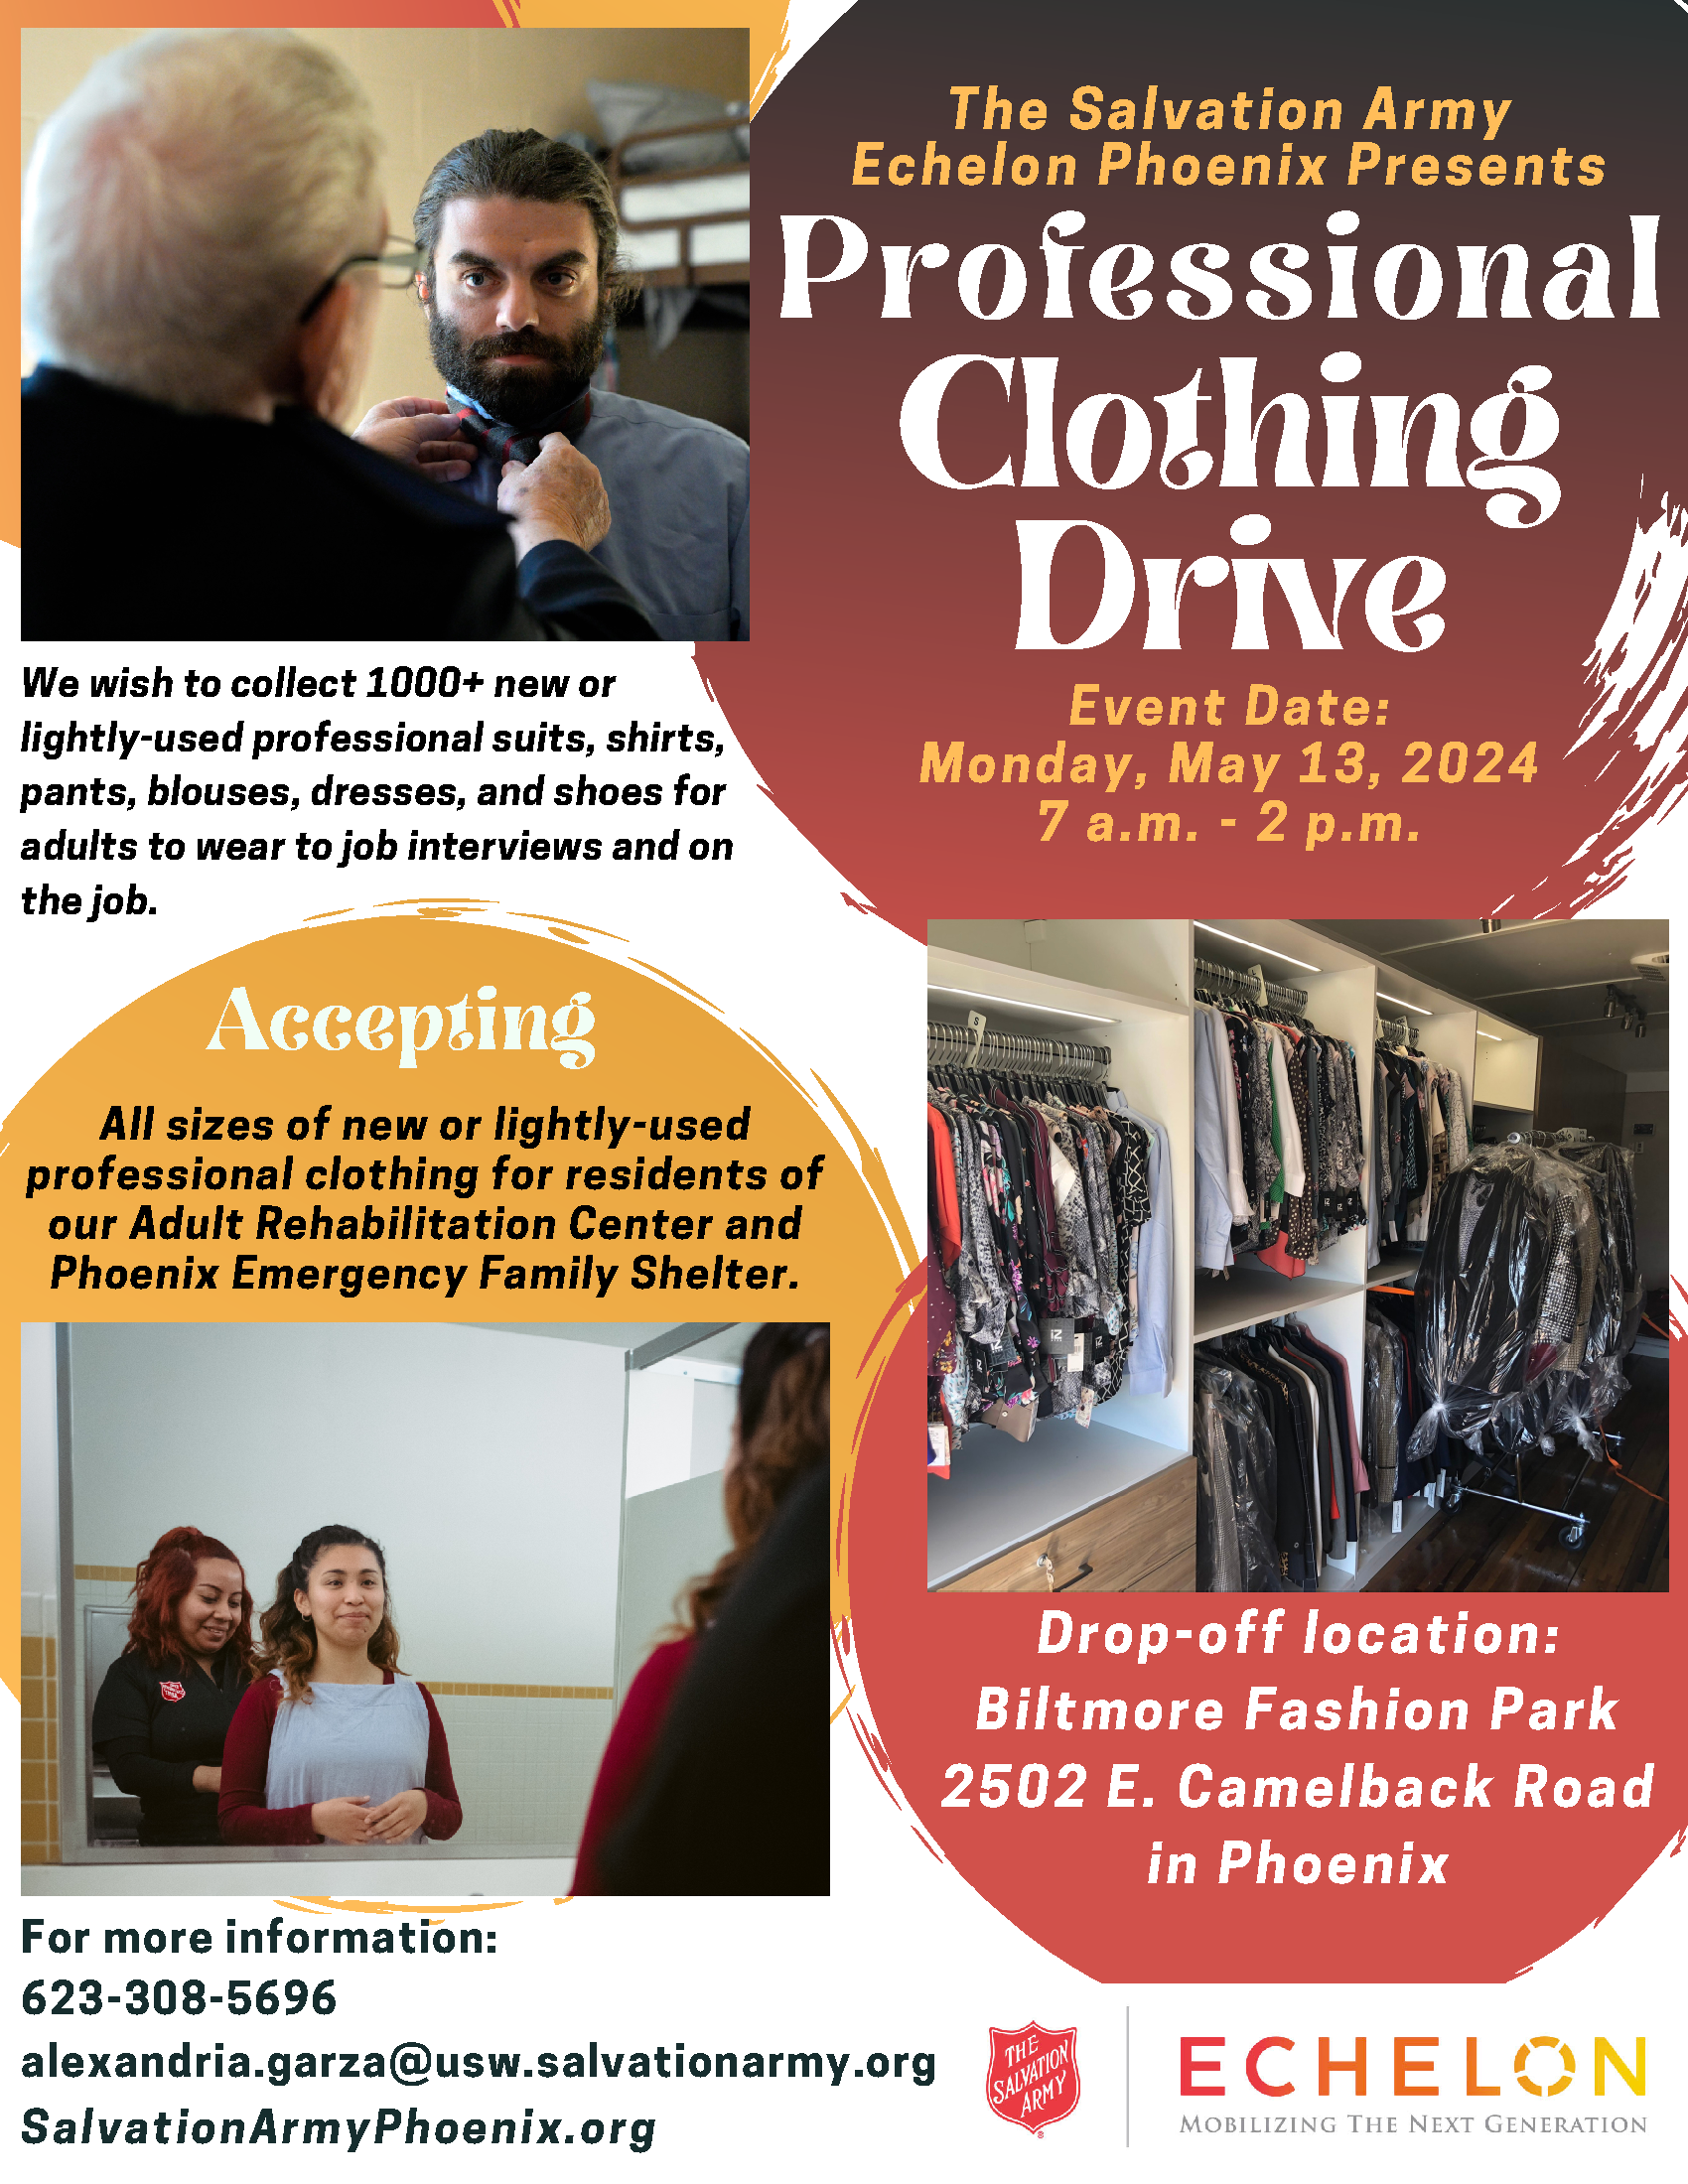 Salvation Army Professional Clothing Drive flyer.